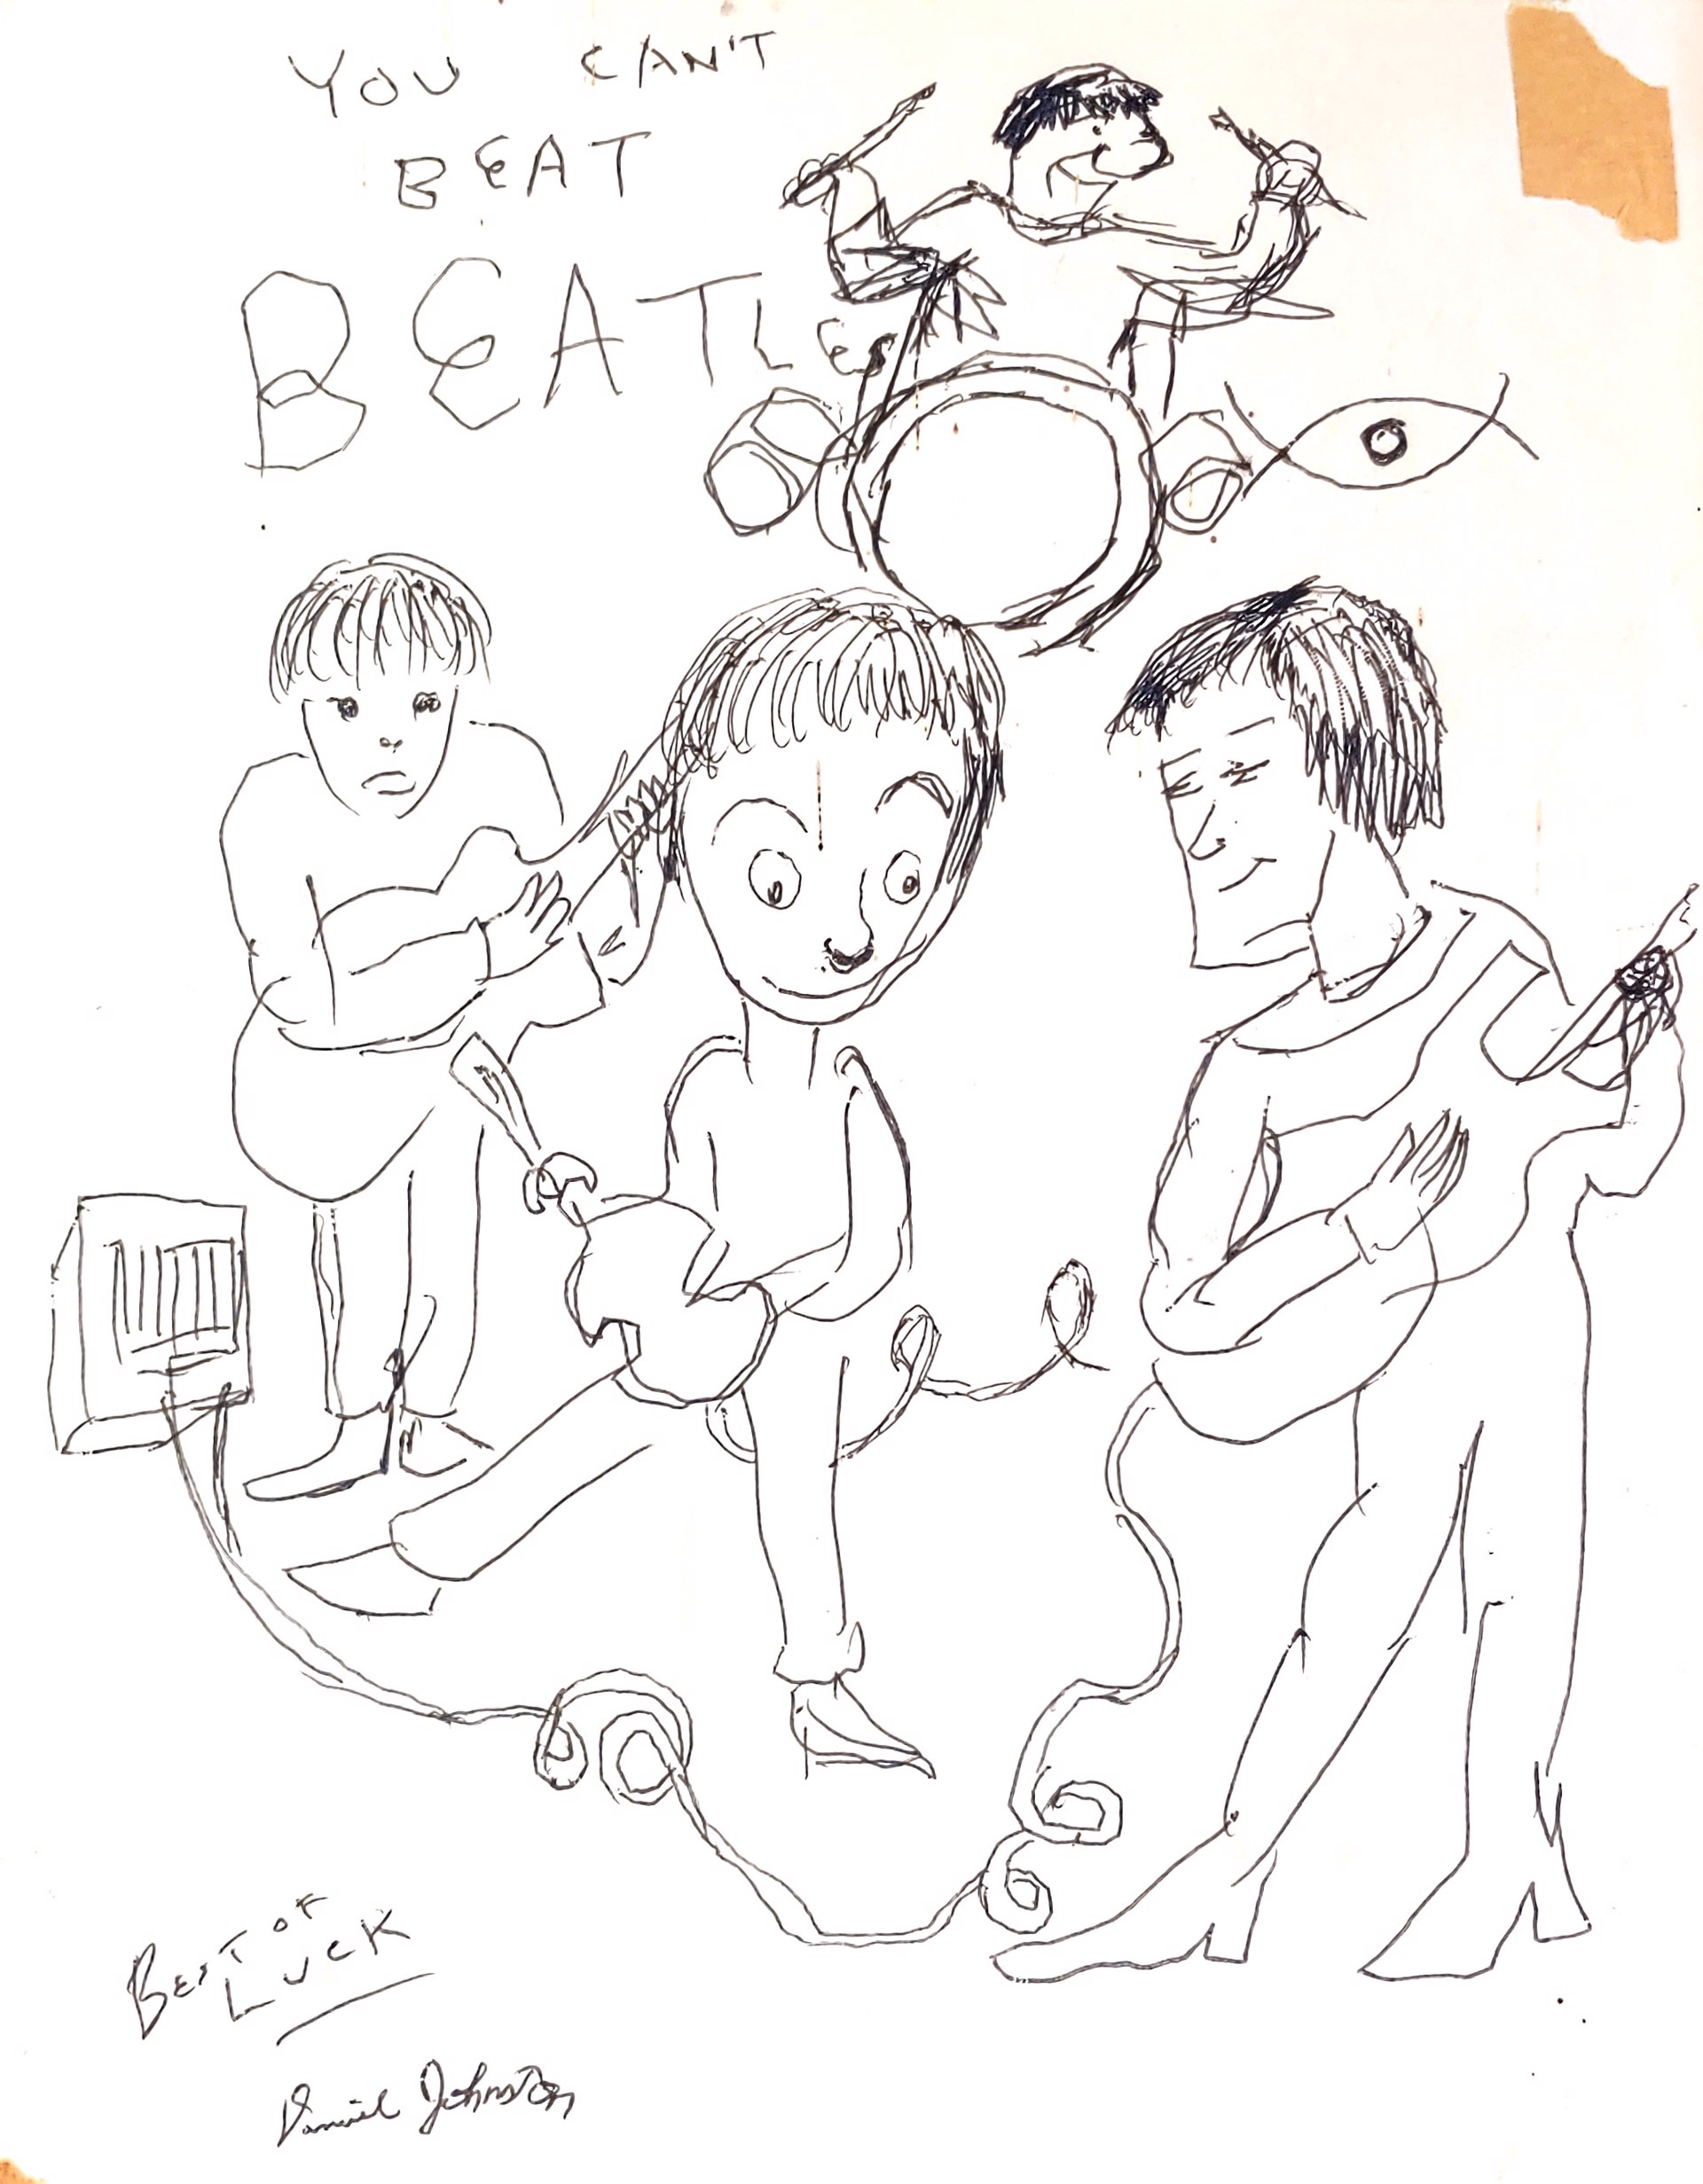 You Can't Beat Beatles by Daniel Johnston